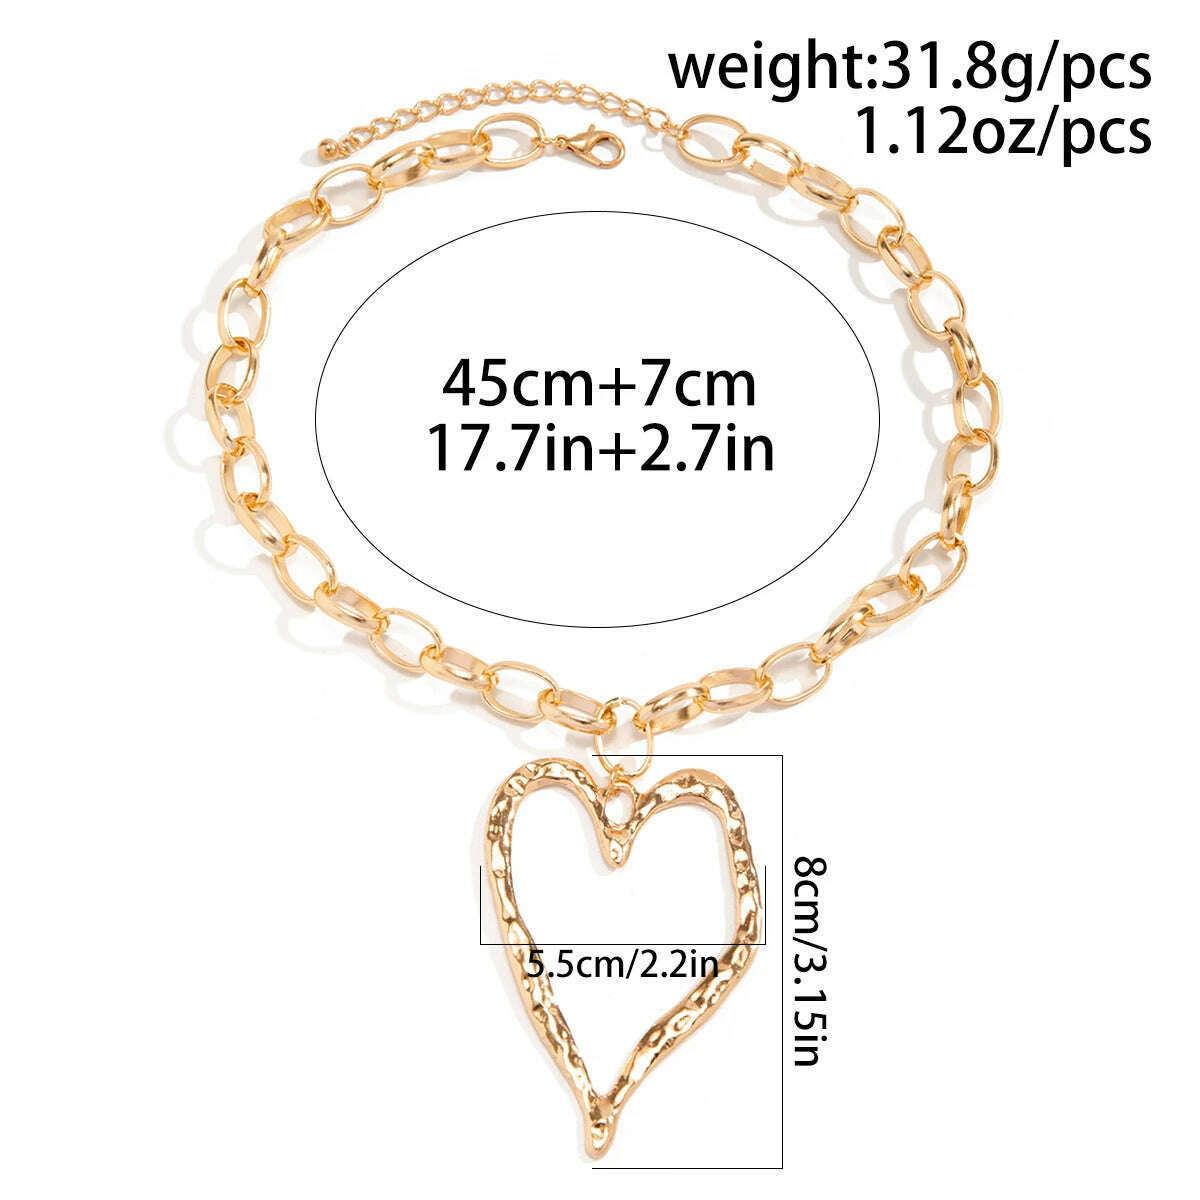 KIMLUD, Ingemark Exaggerated Unique Big Love Heart Pendant Choker Necklace for Women Chunky Heavy Chain Grunge Jewelry Steampunk Men New, KIMLUD Womens Clothes